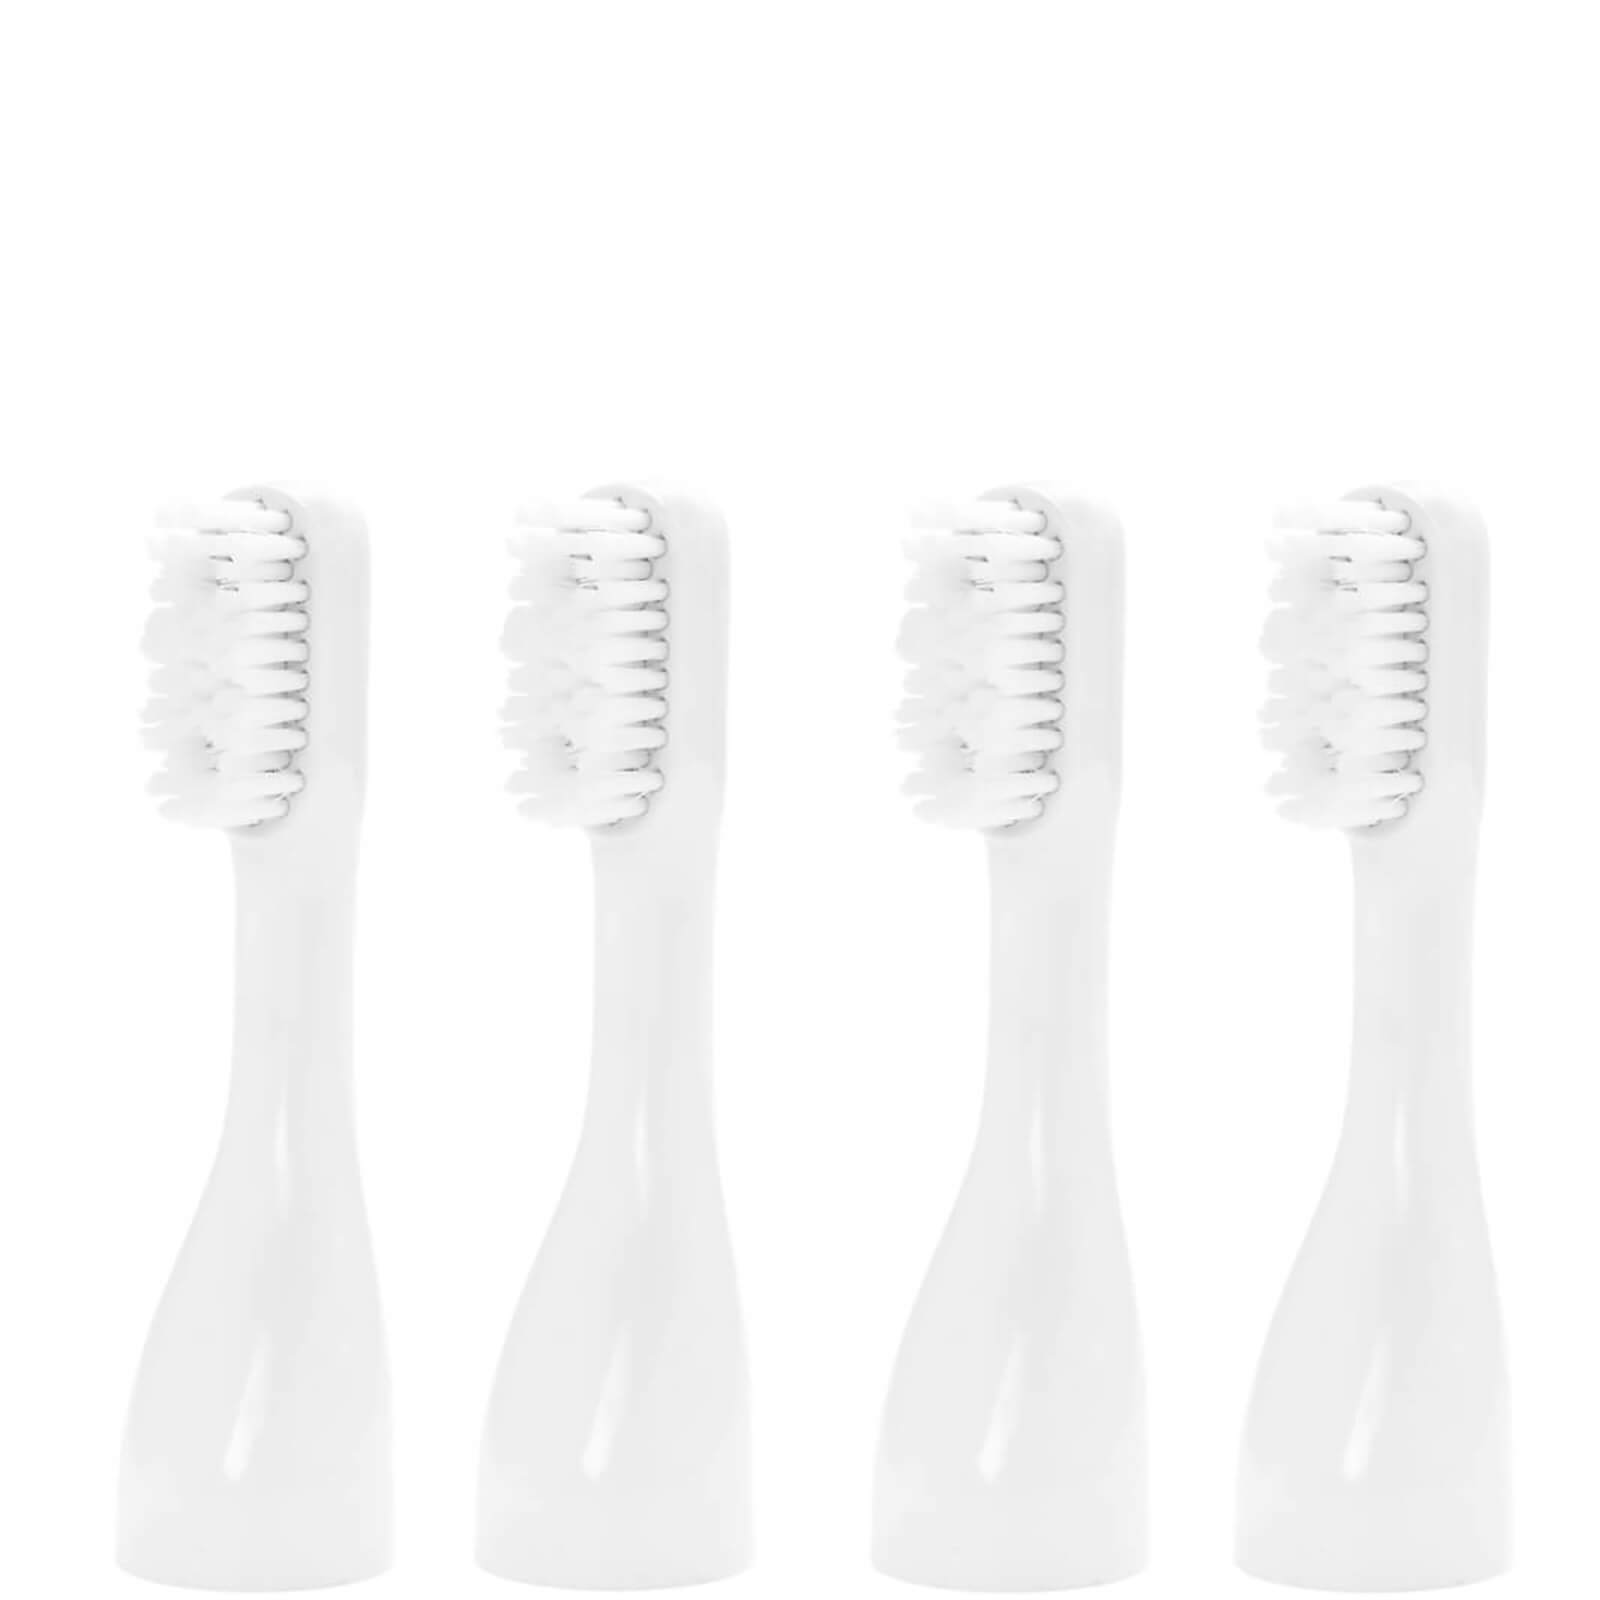 Stylsmile Pack Of 4 Firm Replacement Heads